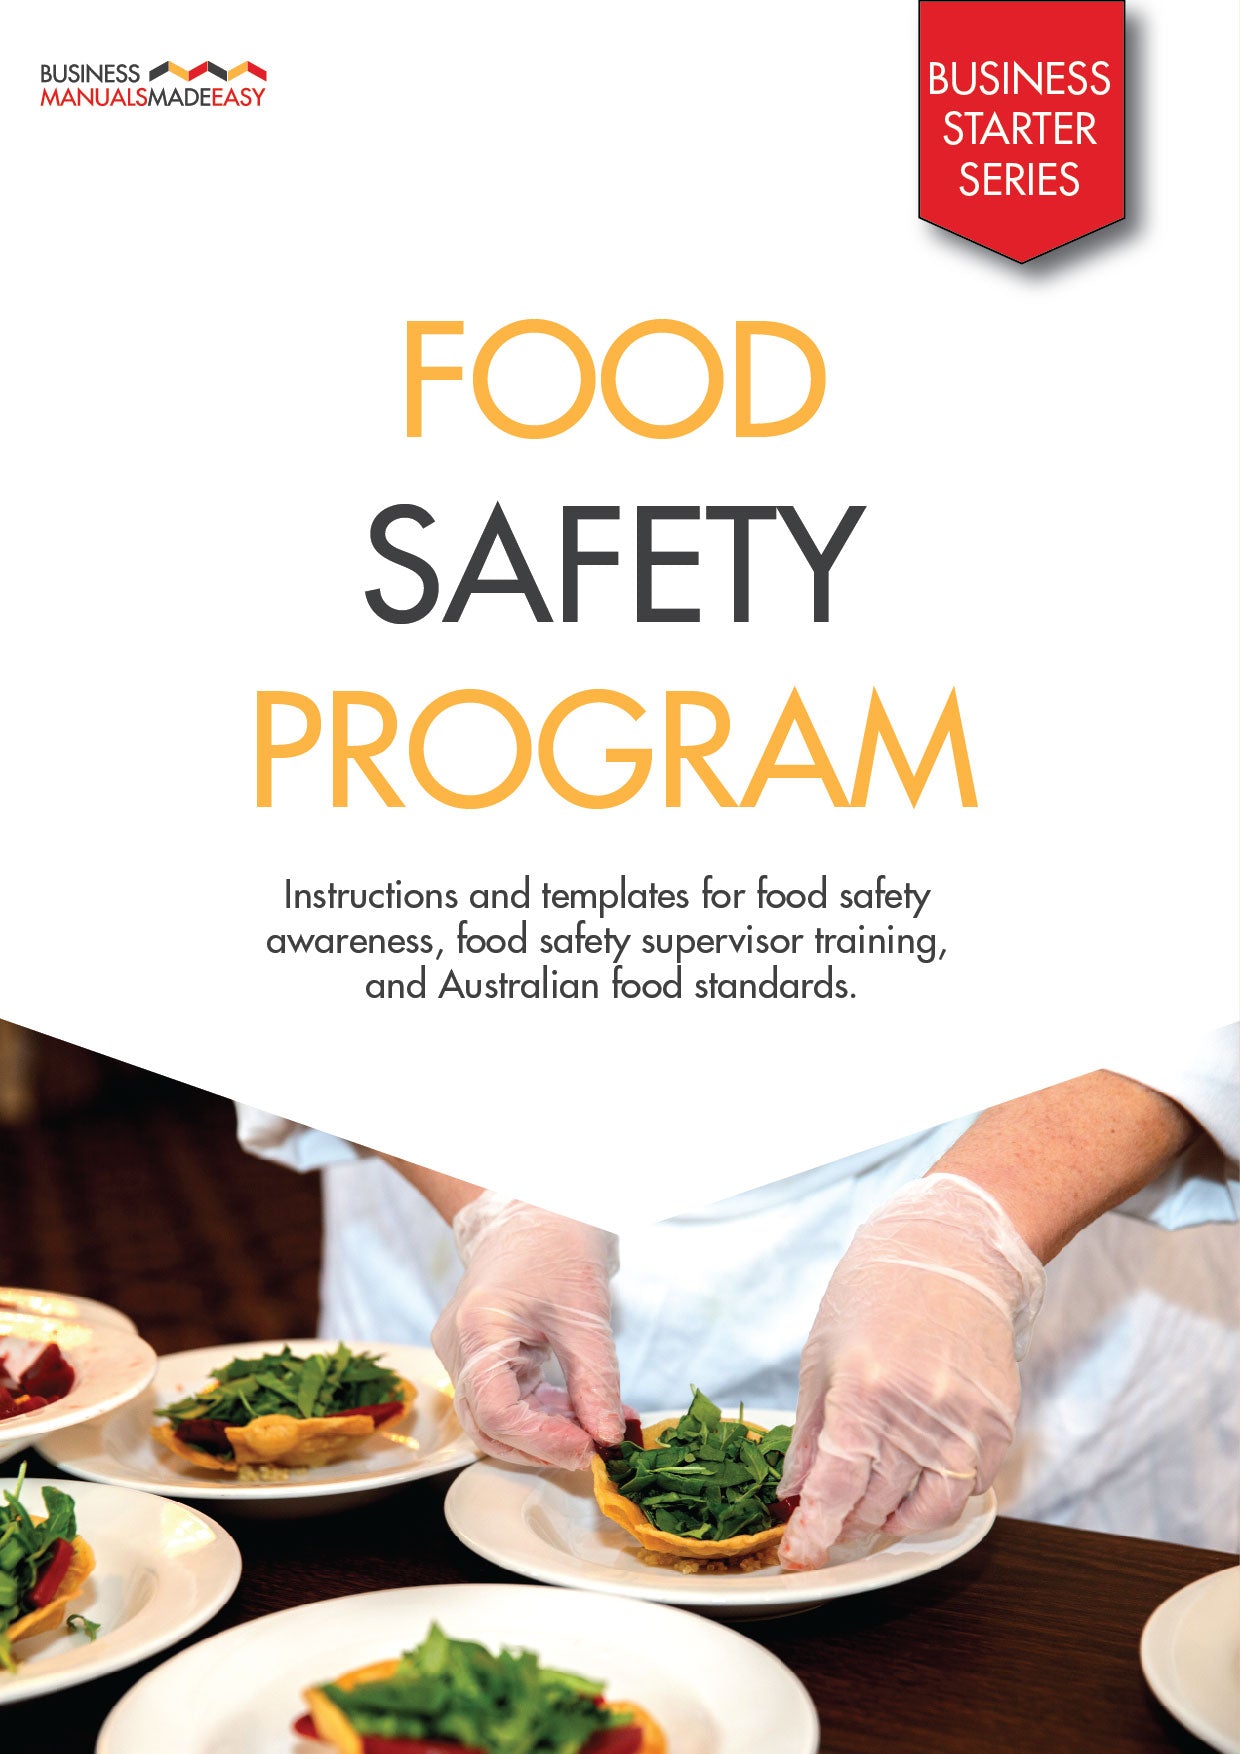 Business Manuals Made Easy: Food Safety Program. This manual includes Food Safety program, Food Safety Supervisor training, Food Safety Awareness program, checklist templates, supplier lists, register templates and many others. Benefits is standard procedures for easy delegation, consistency and expectation of tasks and reducing wastage and costs.